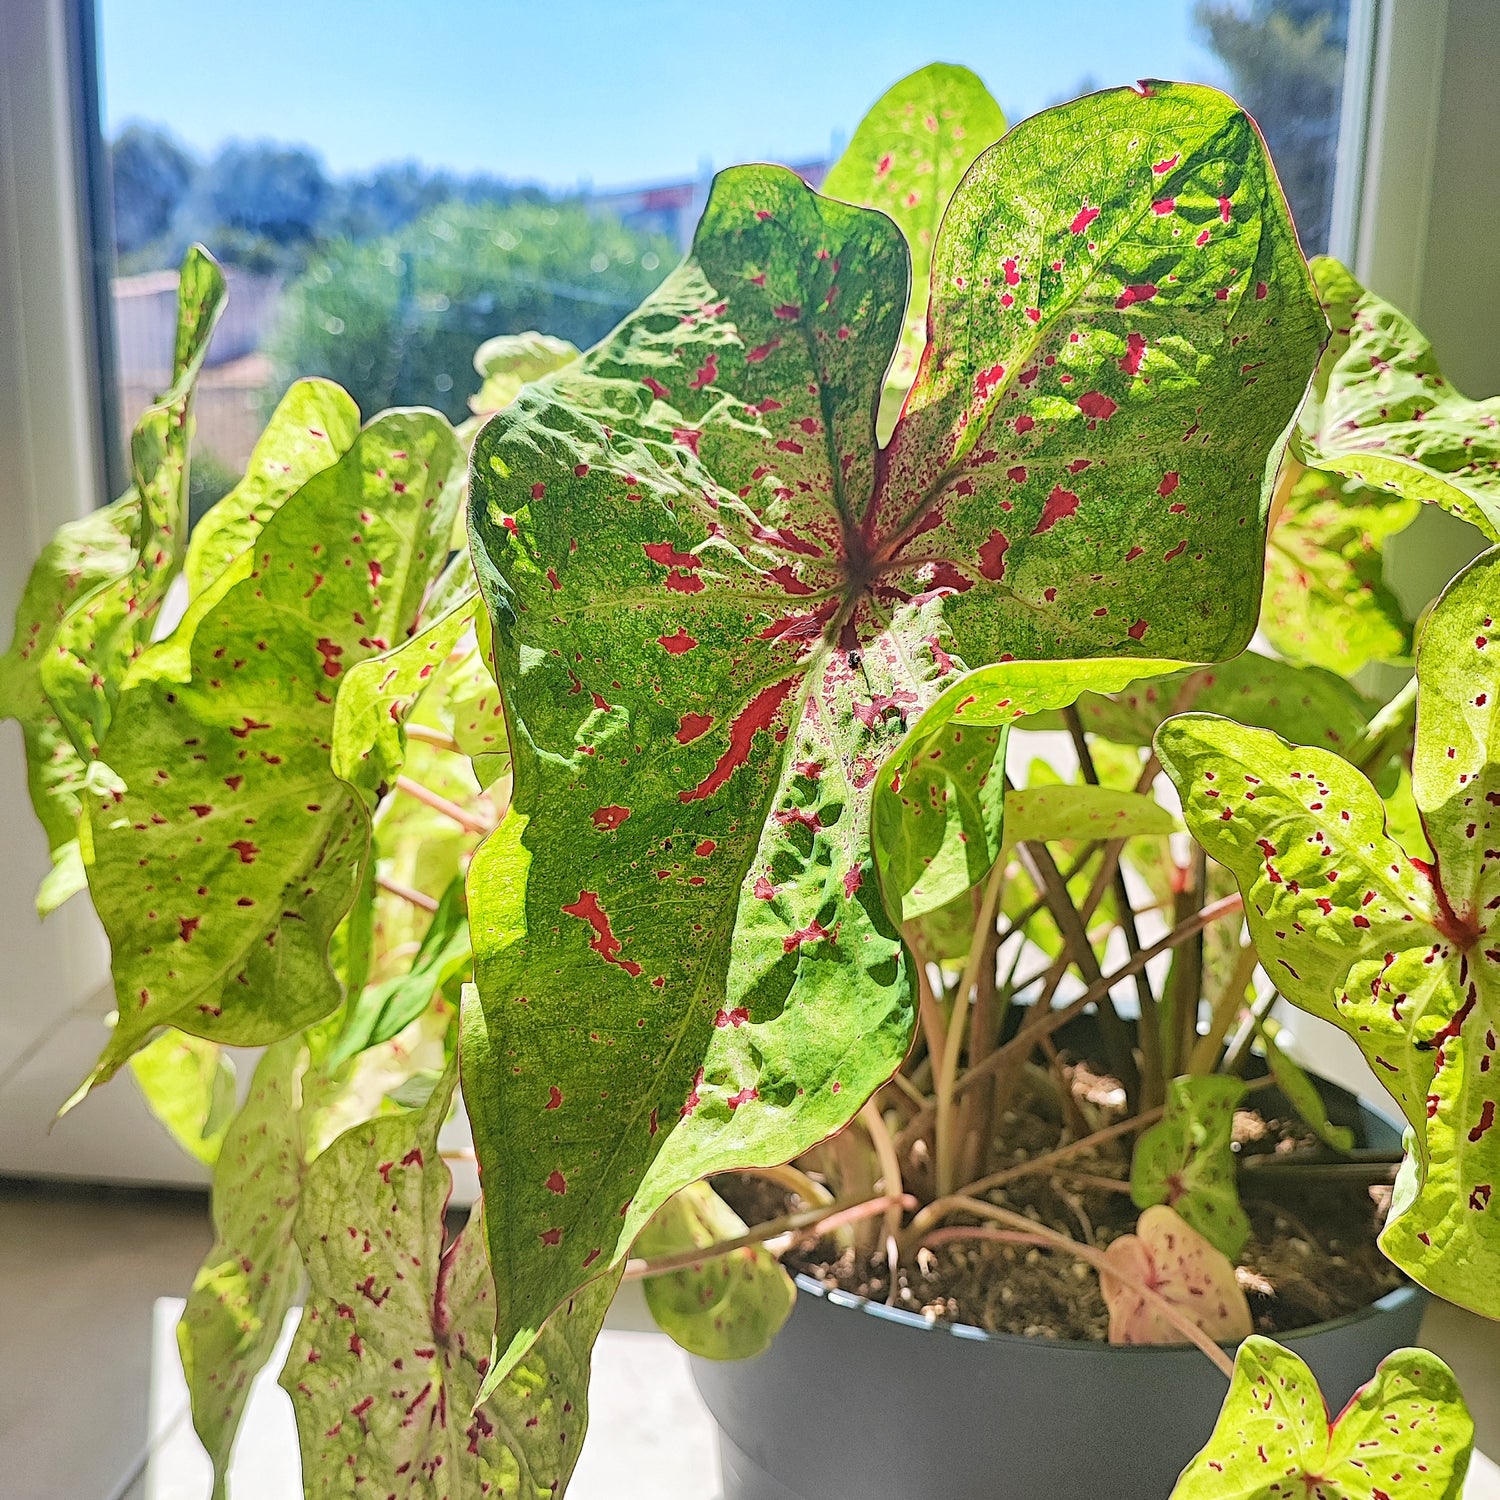 Caladium Miss Muffet (L), plant with fuzzy leaves